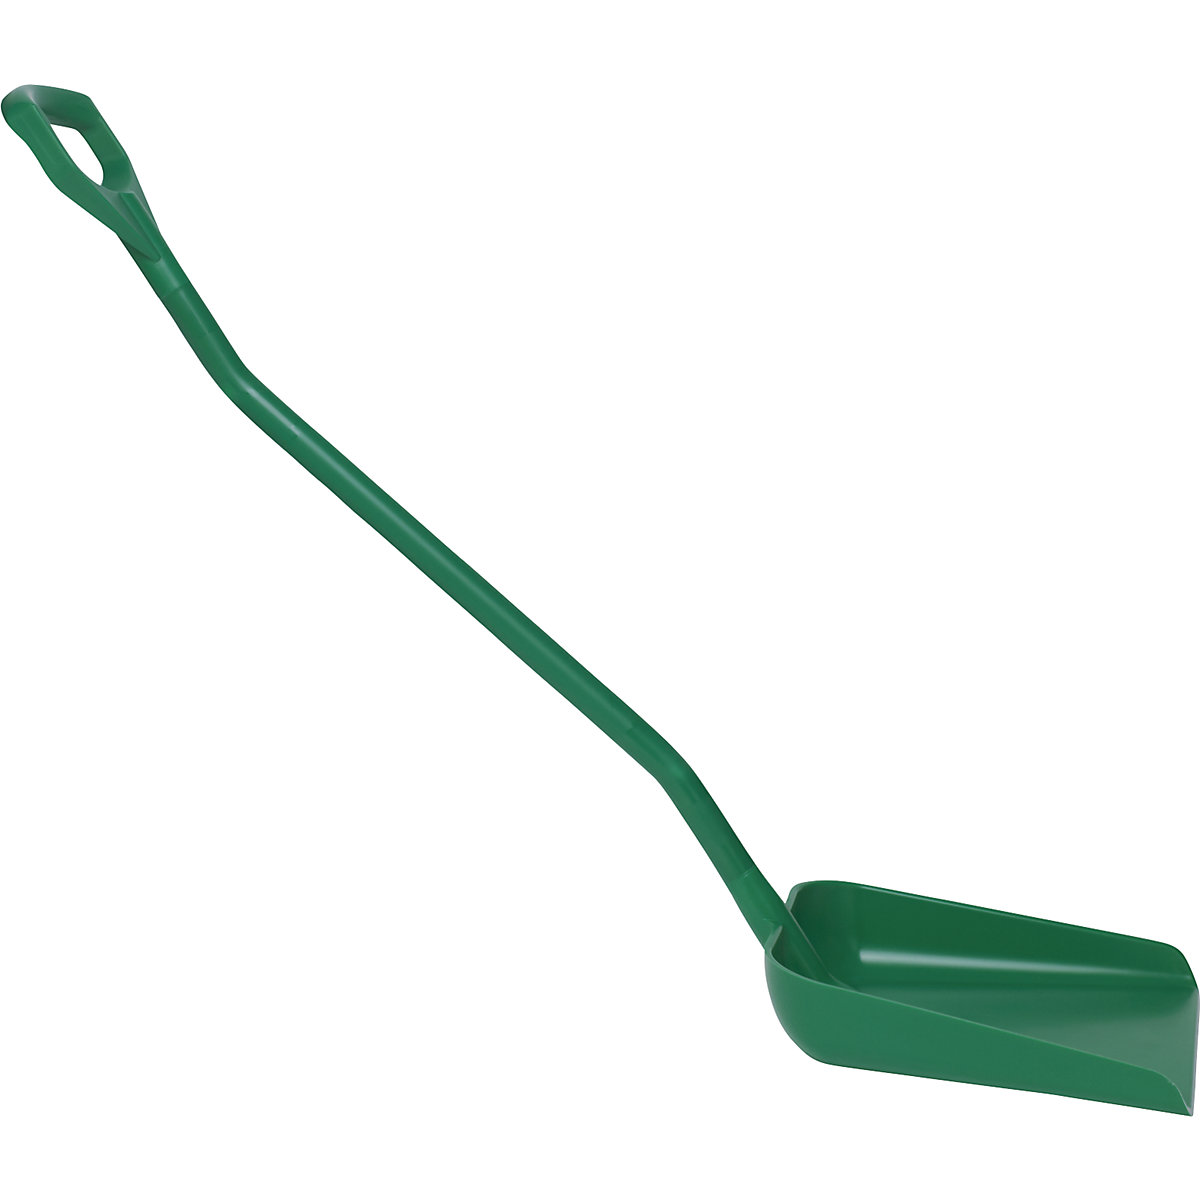 Vikan – Shovel, ergonomic and suitable for foodstuffs, overall length 1310 mm, green